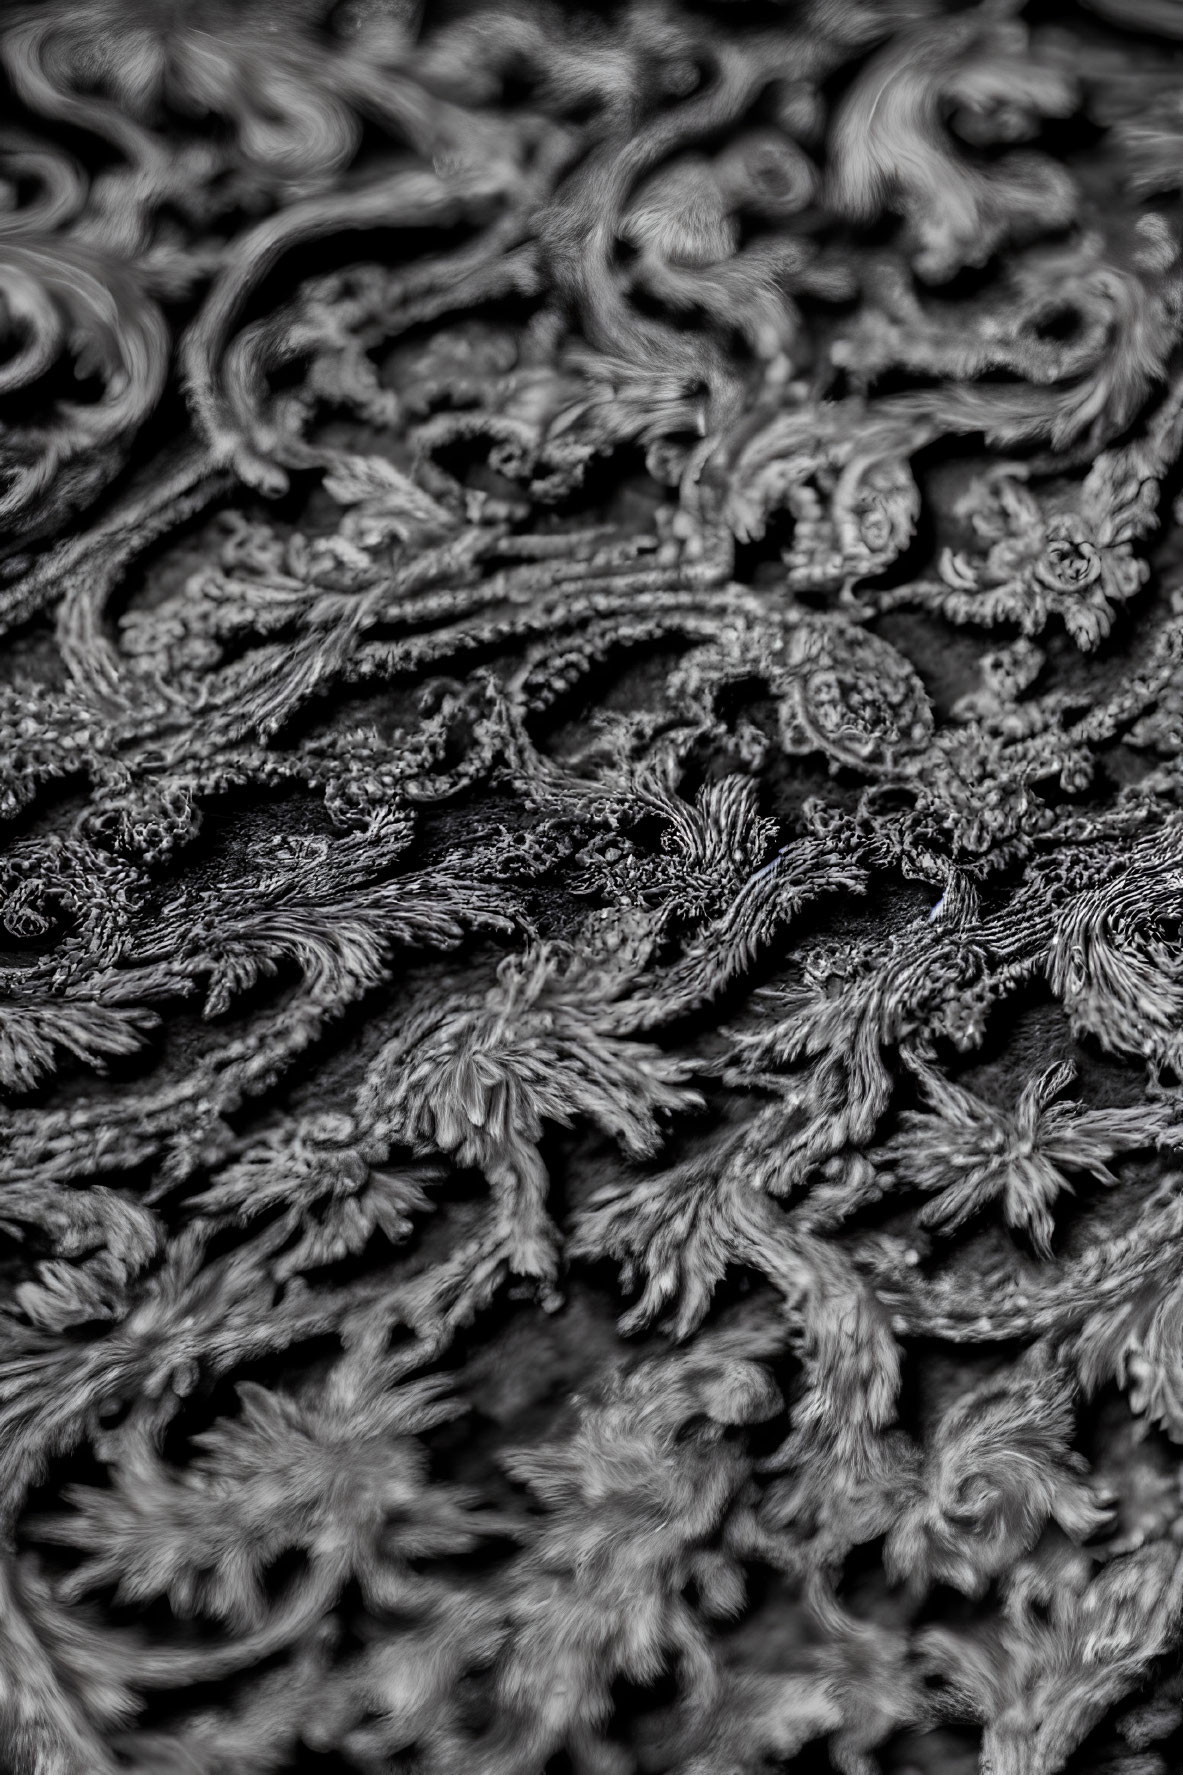 Detailed black and white textured pattern with swirling motifs